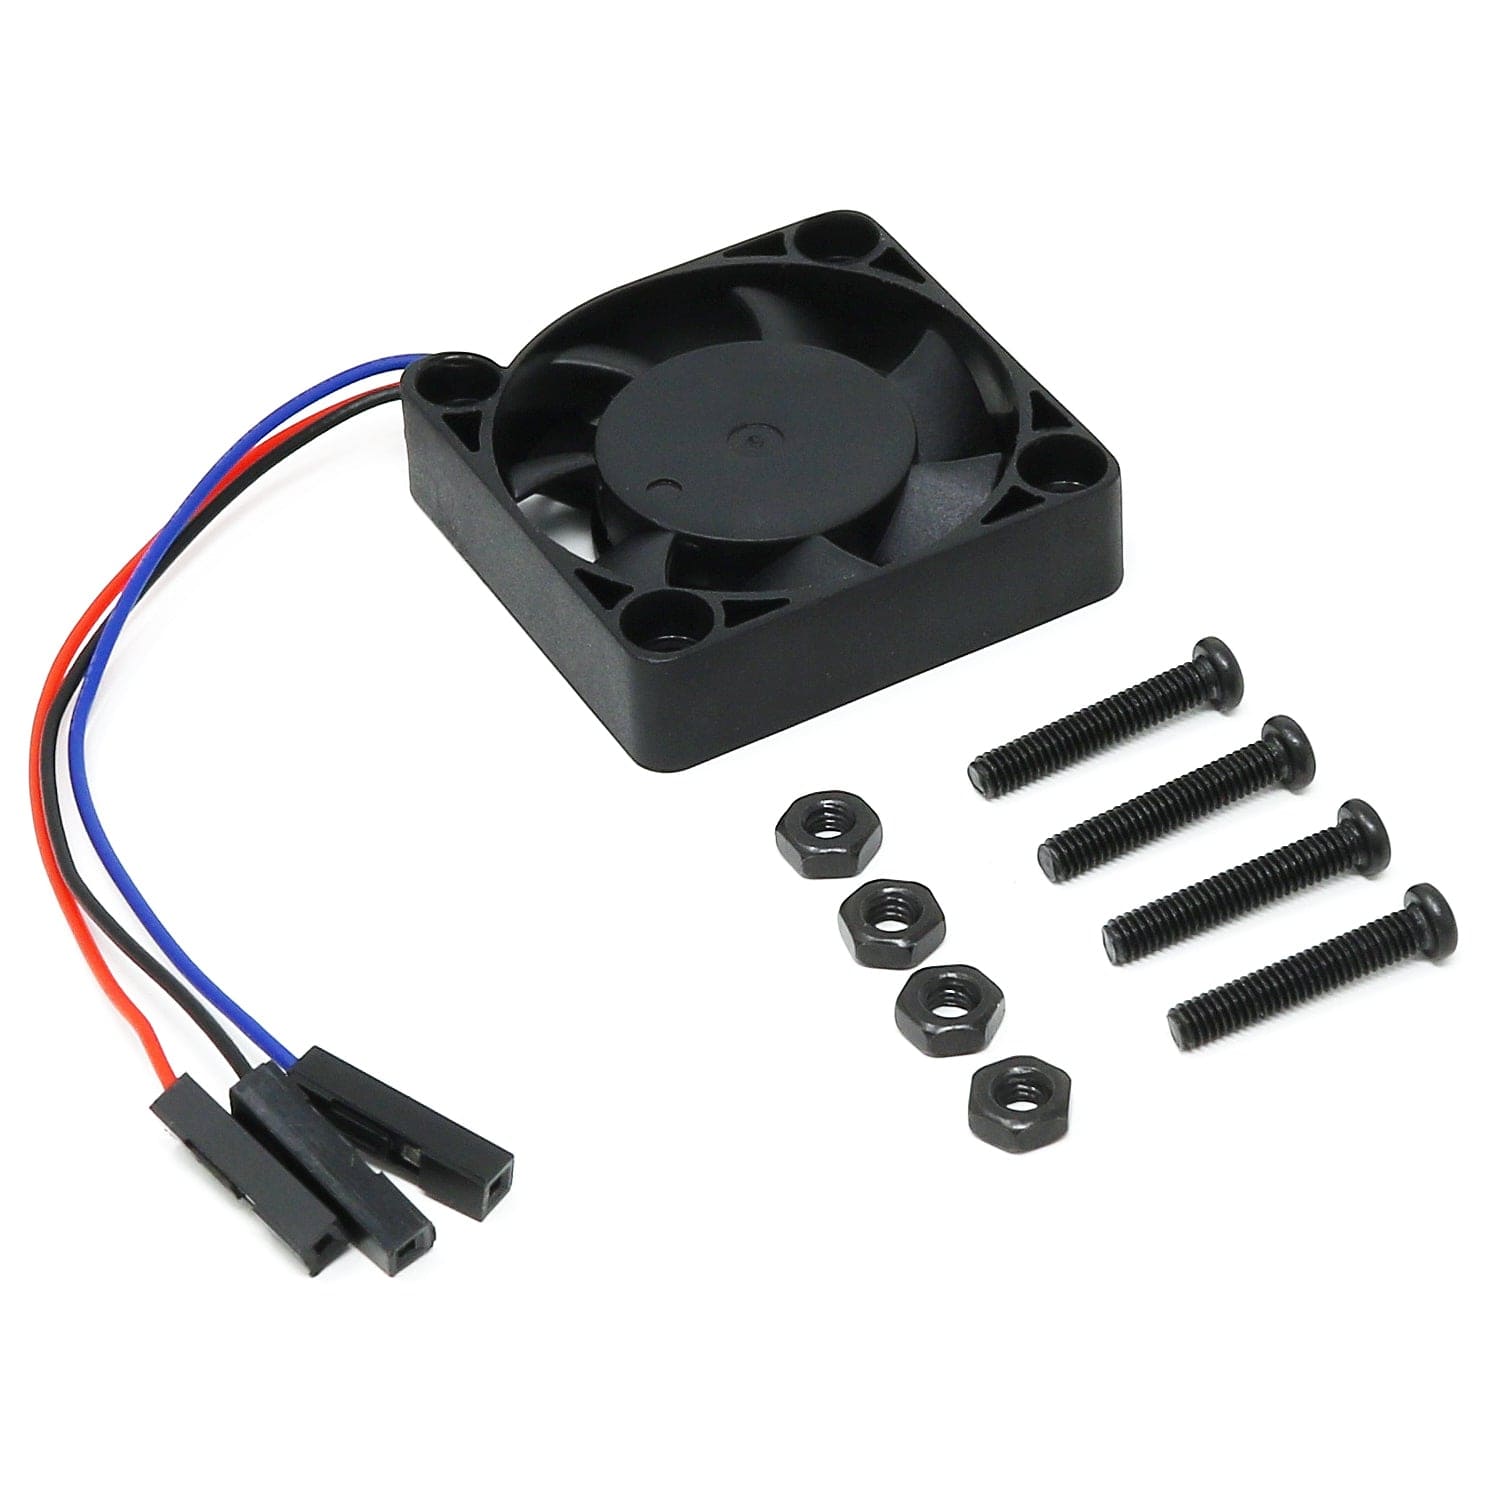 Software-Controllable 5V 30mm Fan for Raspberry Pi - The Pi Hut